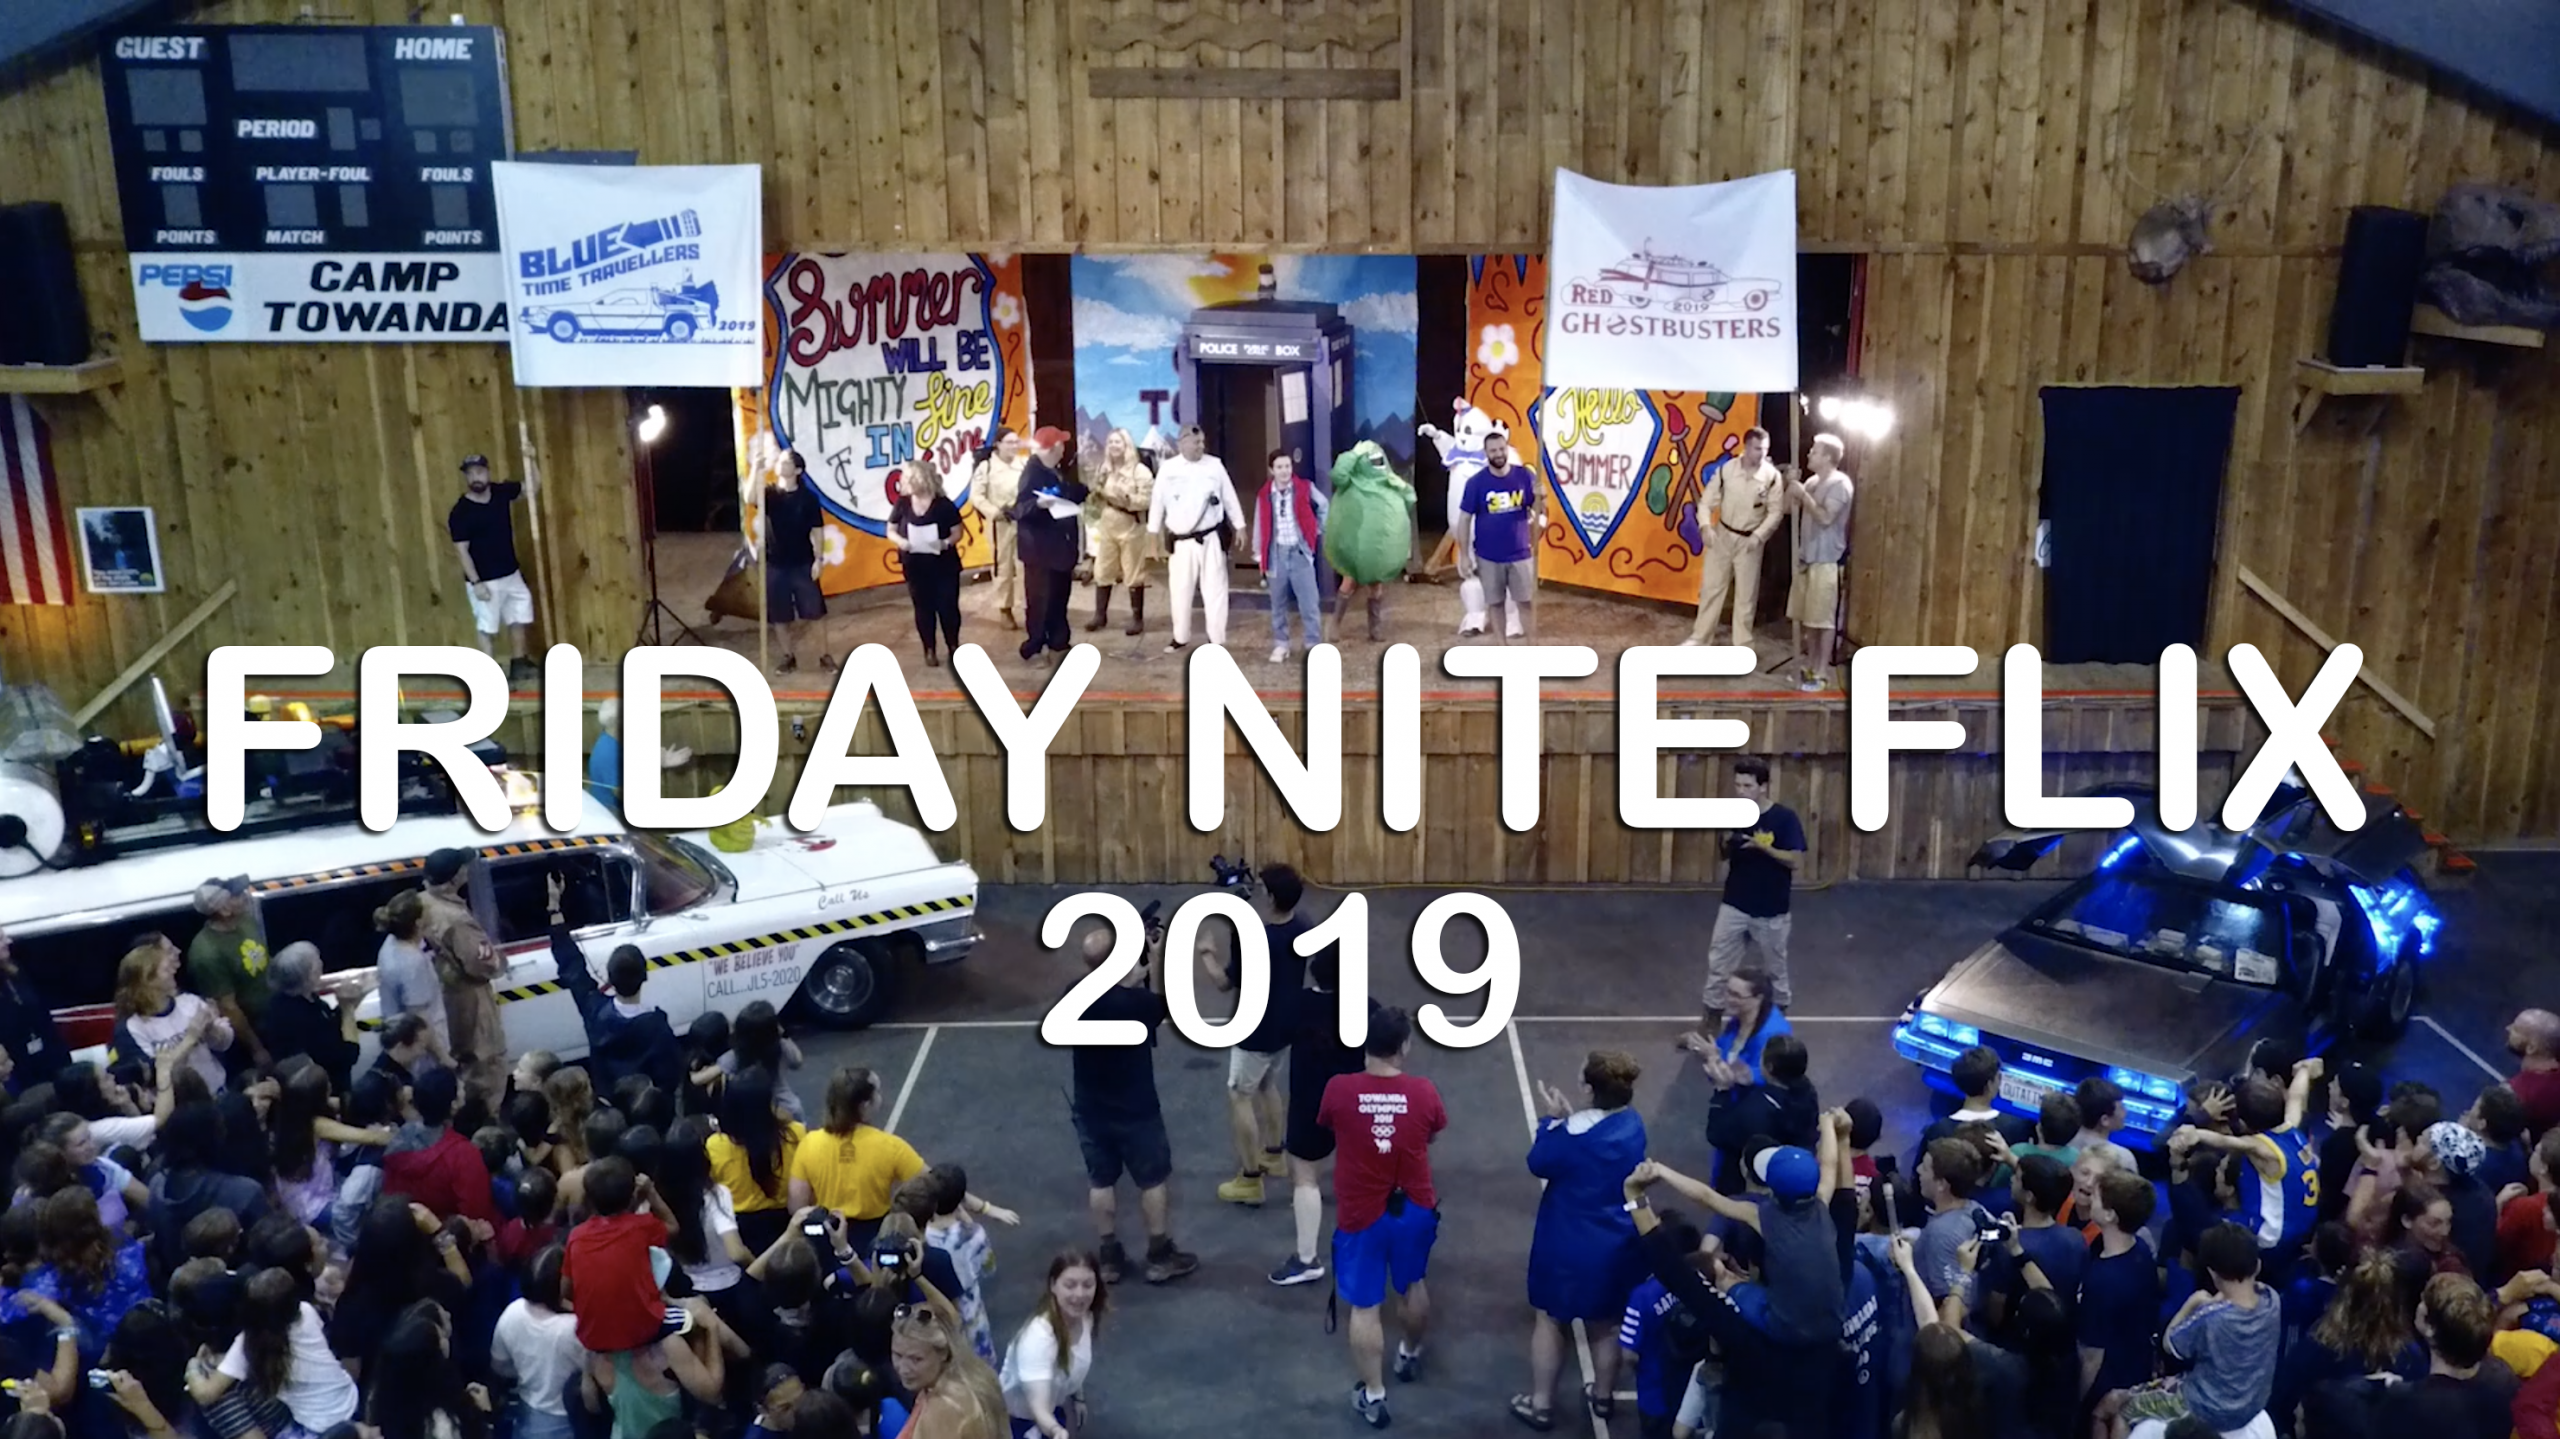 2019 Archives - Friday Nite Flix - Camp Towanda's Video Highlights and News